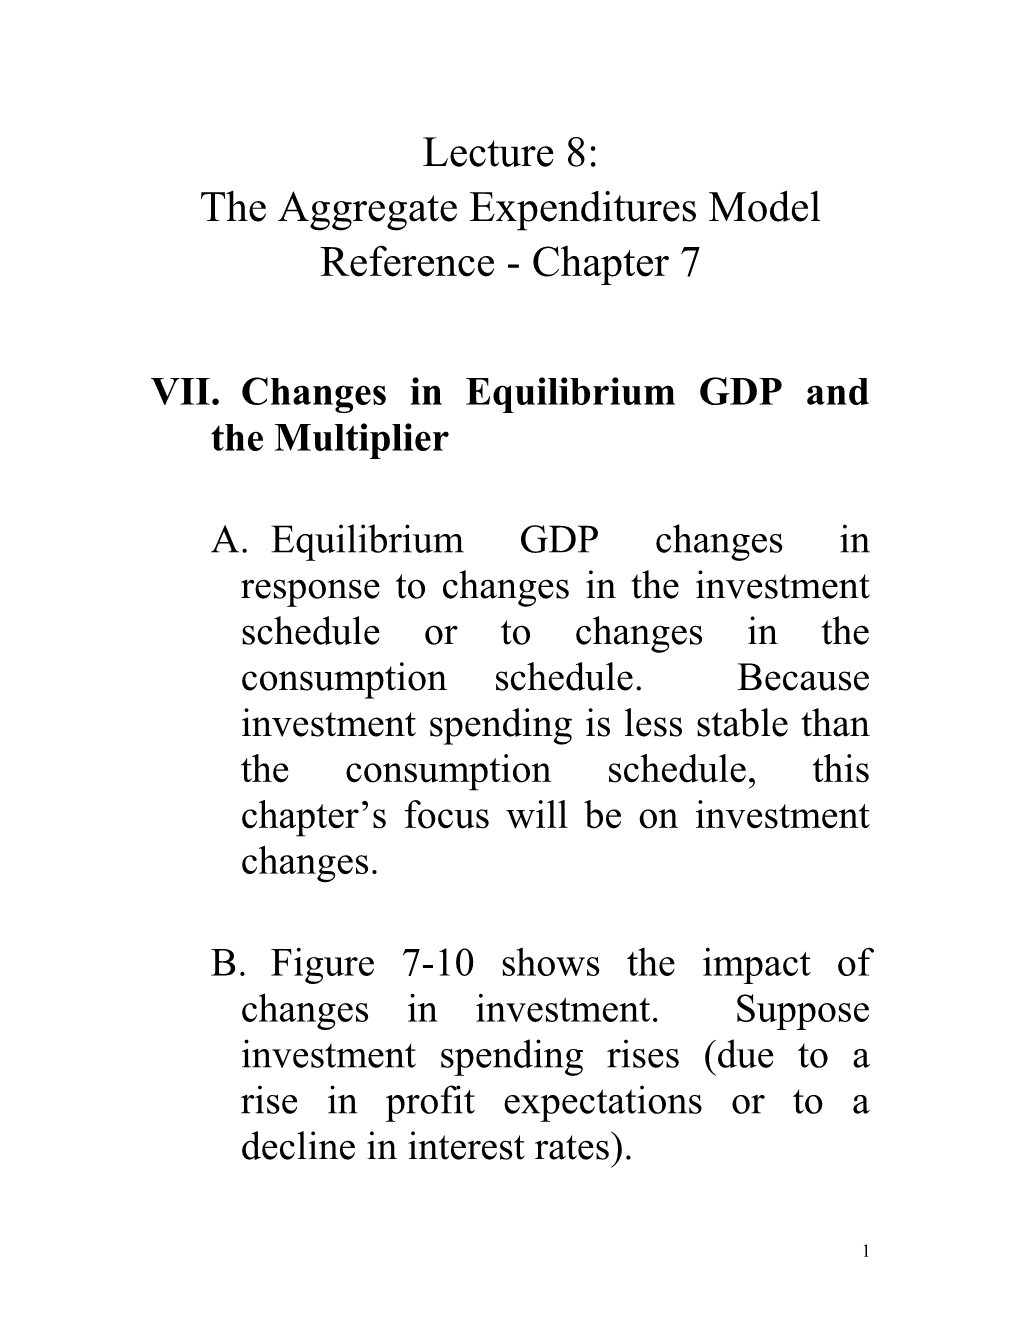 VII.Changes in Equilibrium GDP and the Multiplier